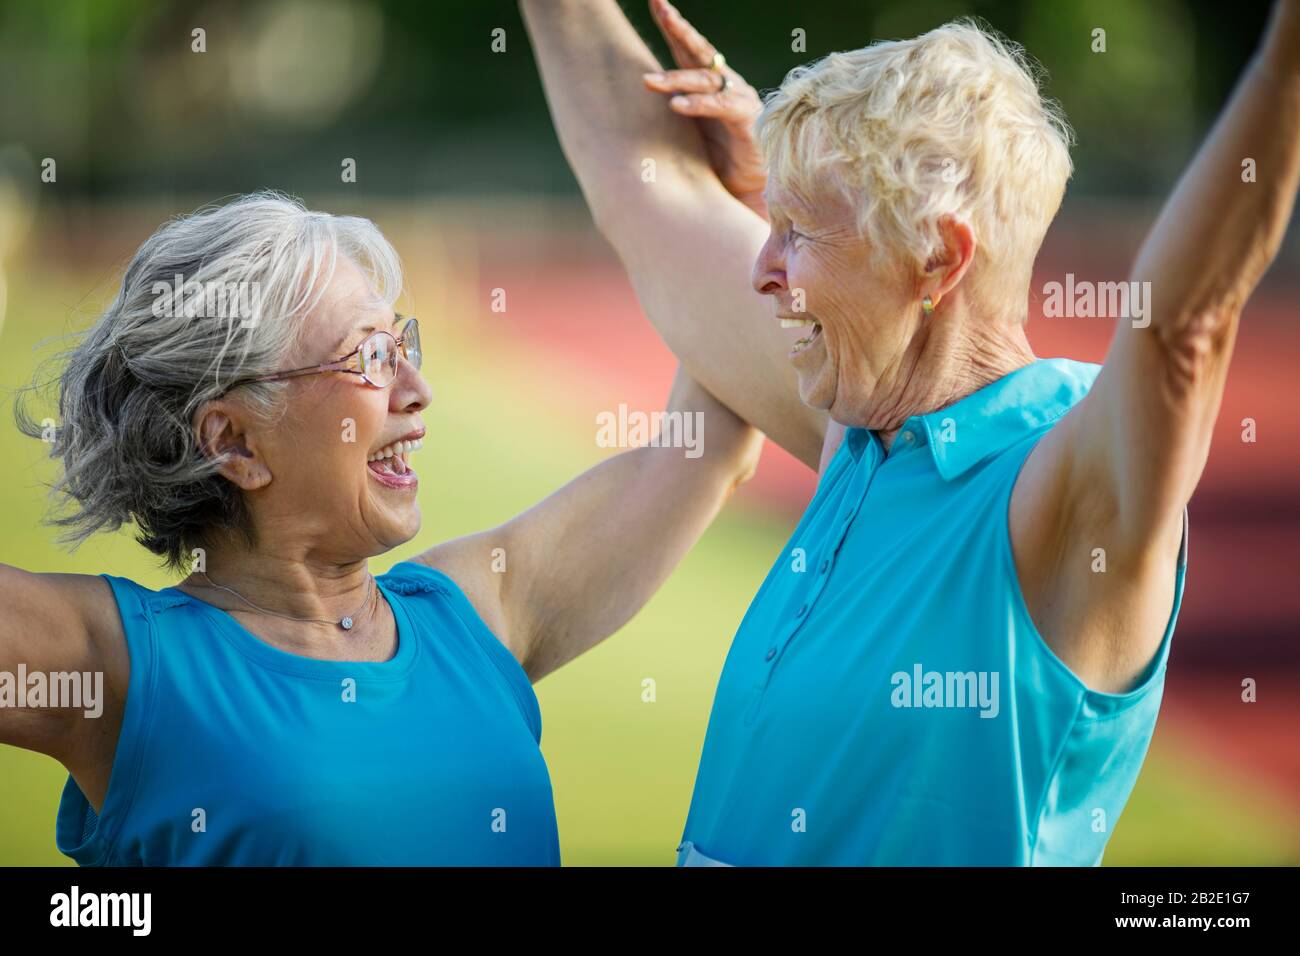 Two elderly friends celebrate crossing the finish line at an athletics event Stock Photo